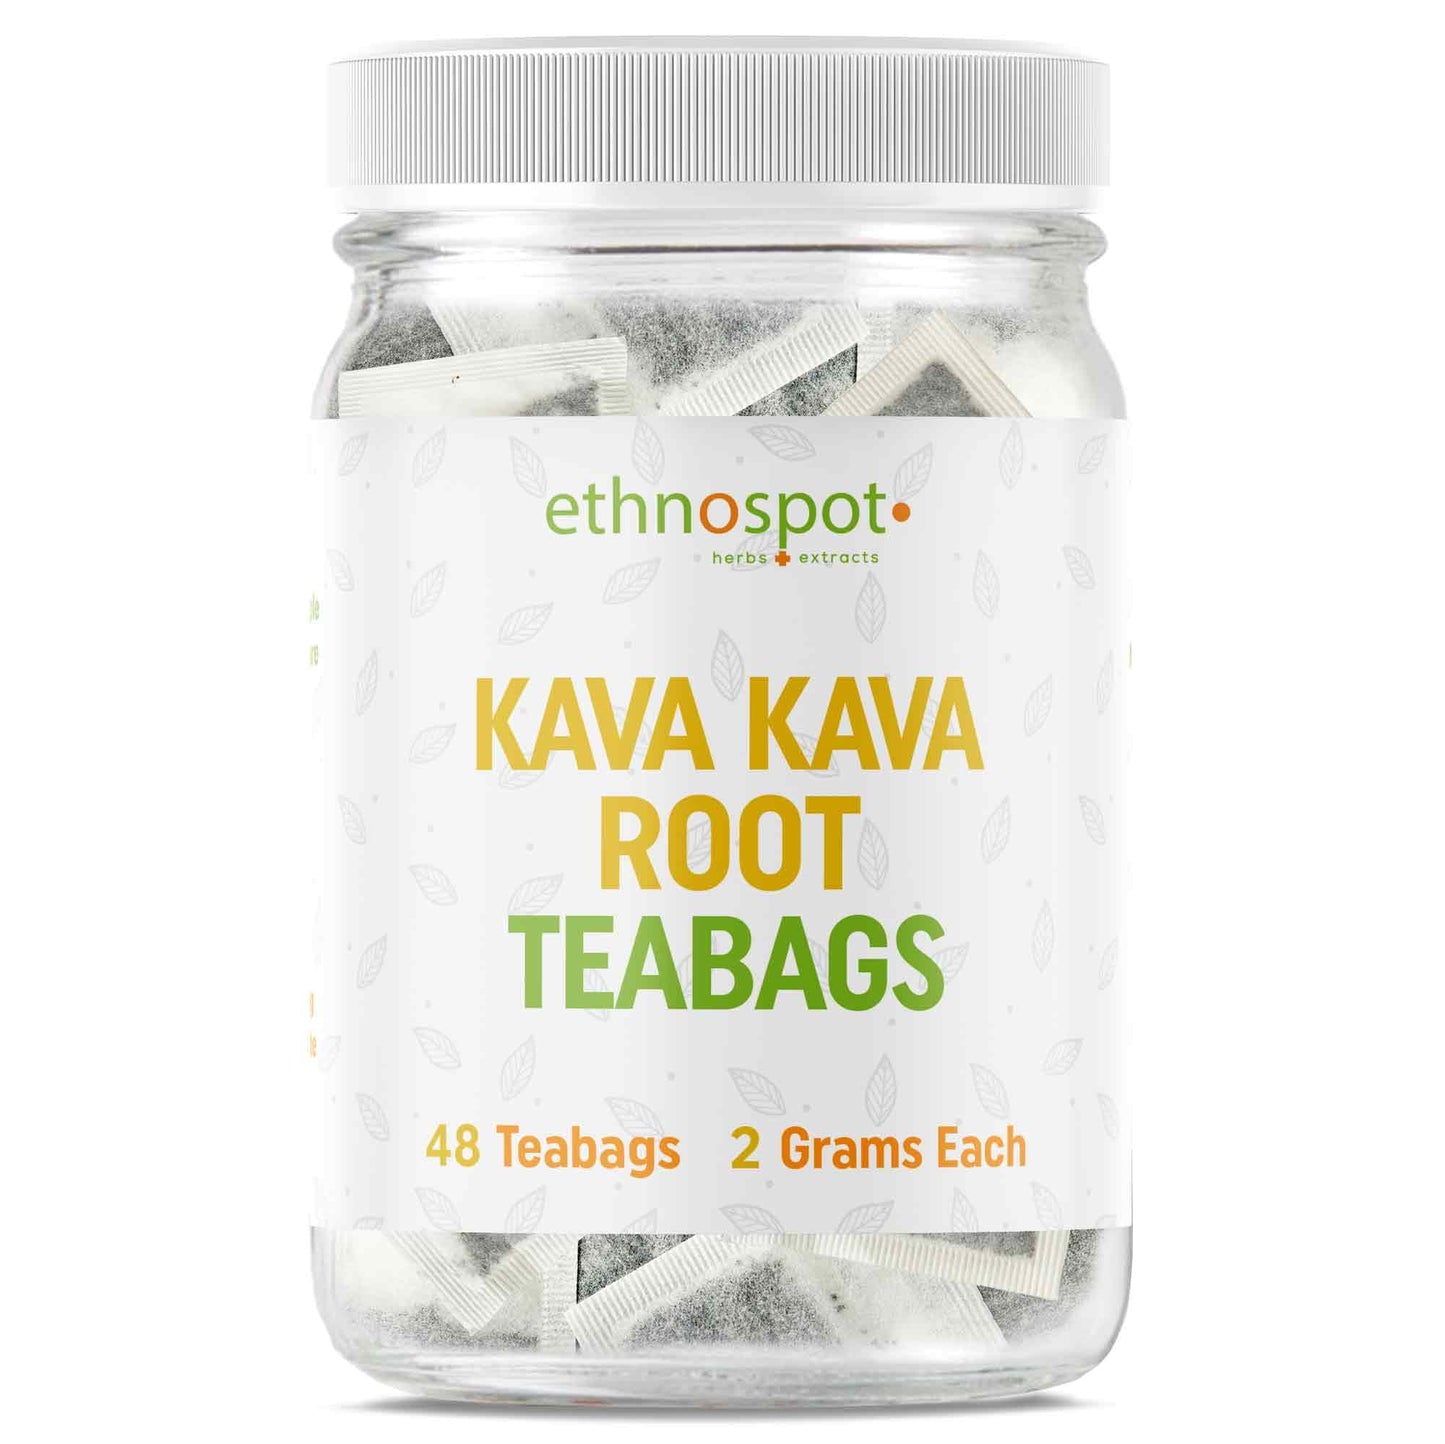 Kava Kava Root Teabags - Relaxation Inducing Herbal Tea